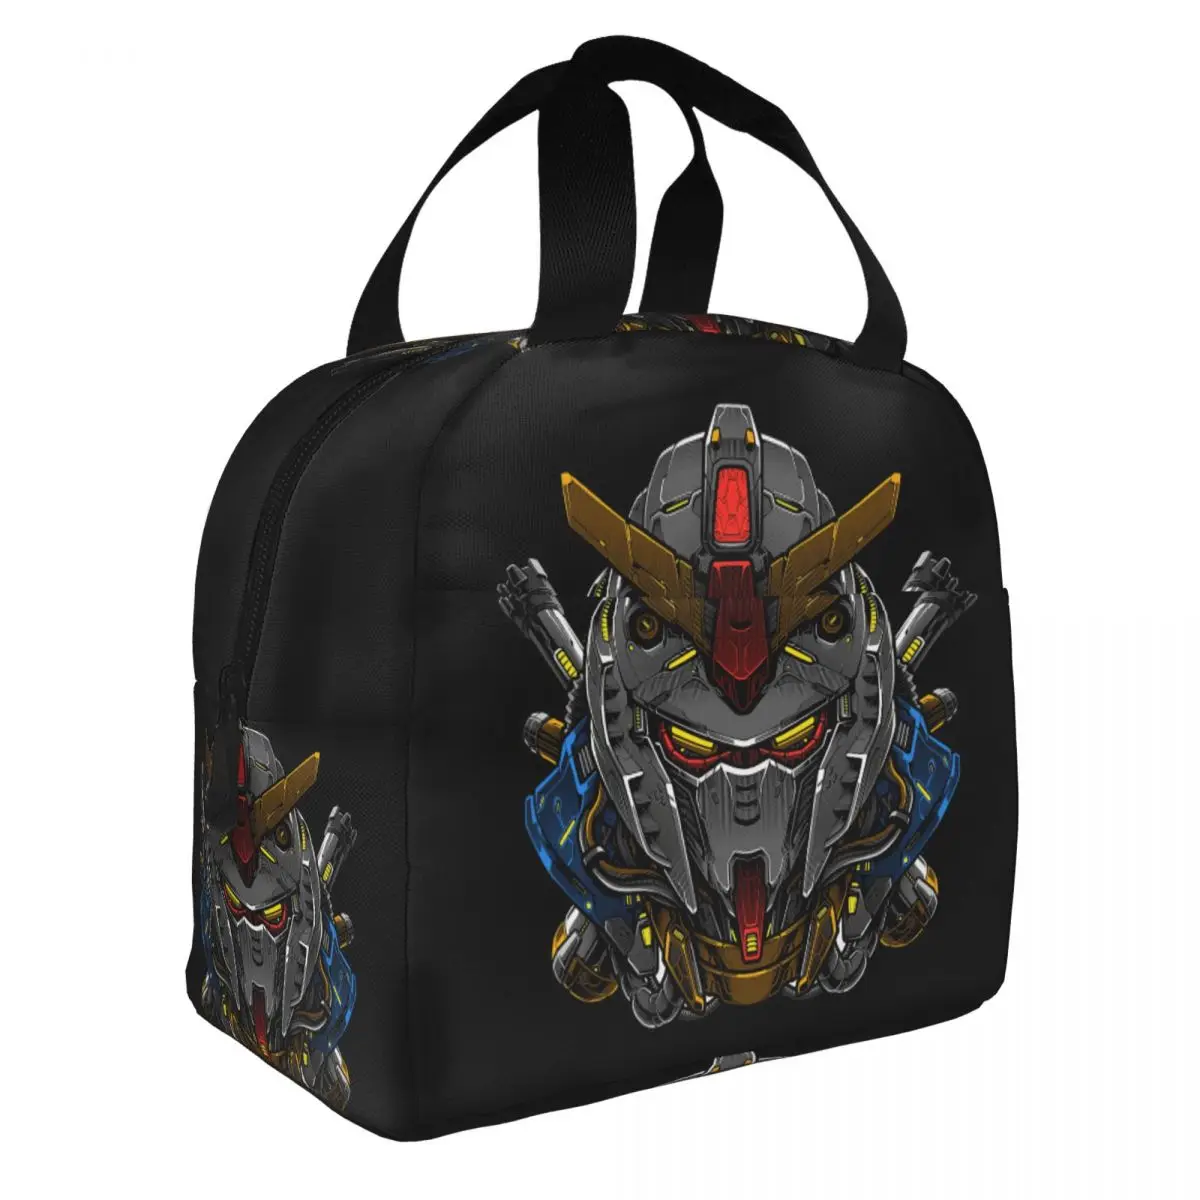 Rx 78 Mecha Lunch Bento Bags Portable Aluminum Foil thickened Thermal Cloth Lunch Bag for Women Men Boy